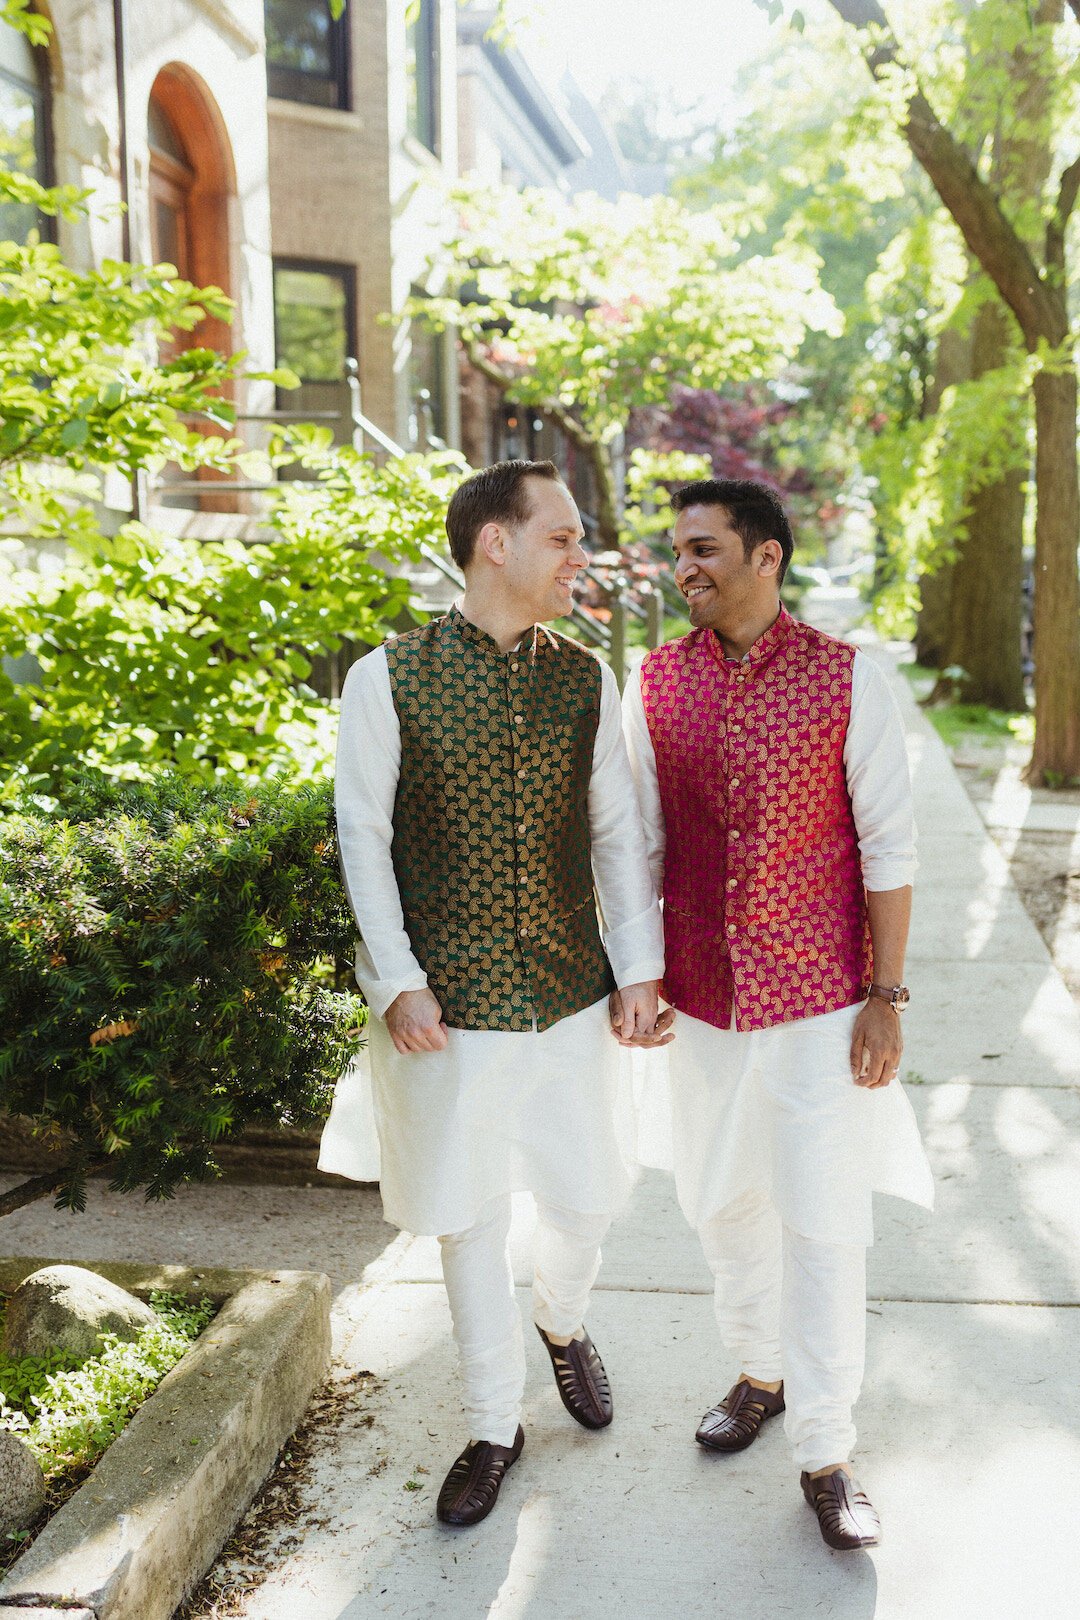 Indian American Chicago wedding captured by Ricardo Quintana Photography featured on CHI thee WED!